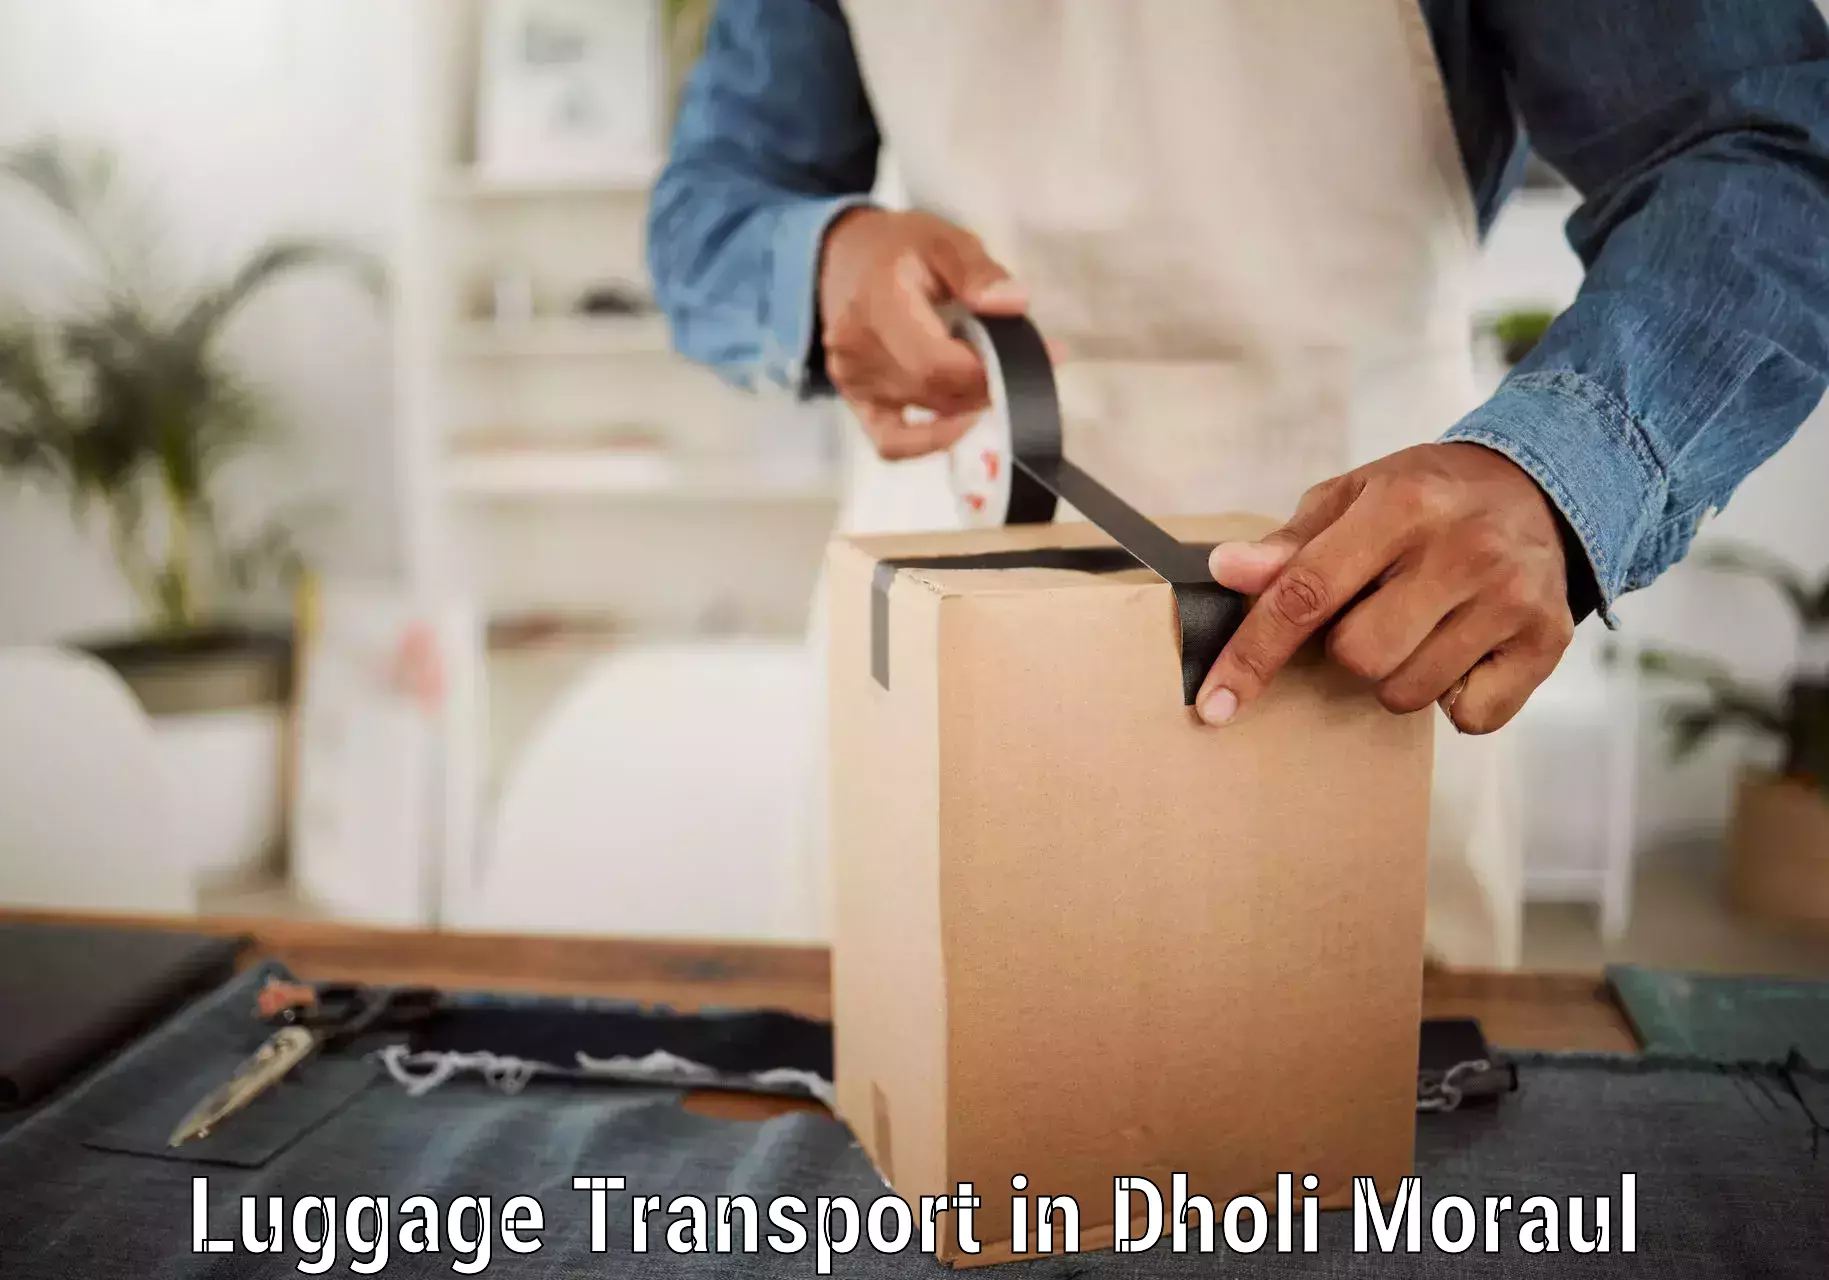 Luggage transport guidelines in Dholi Moraul